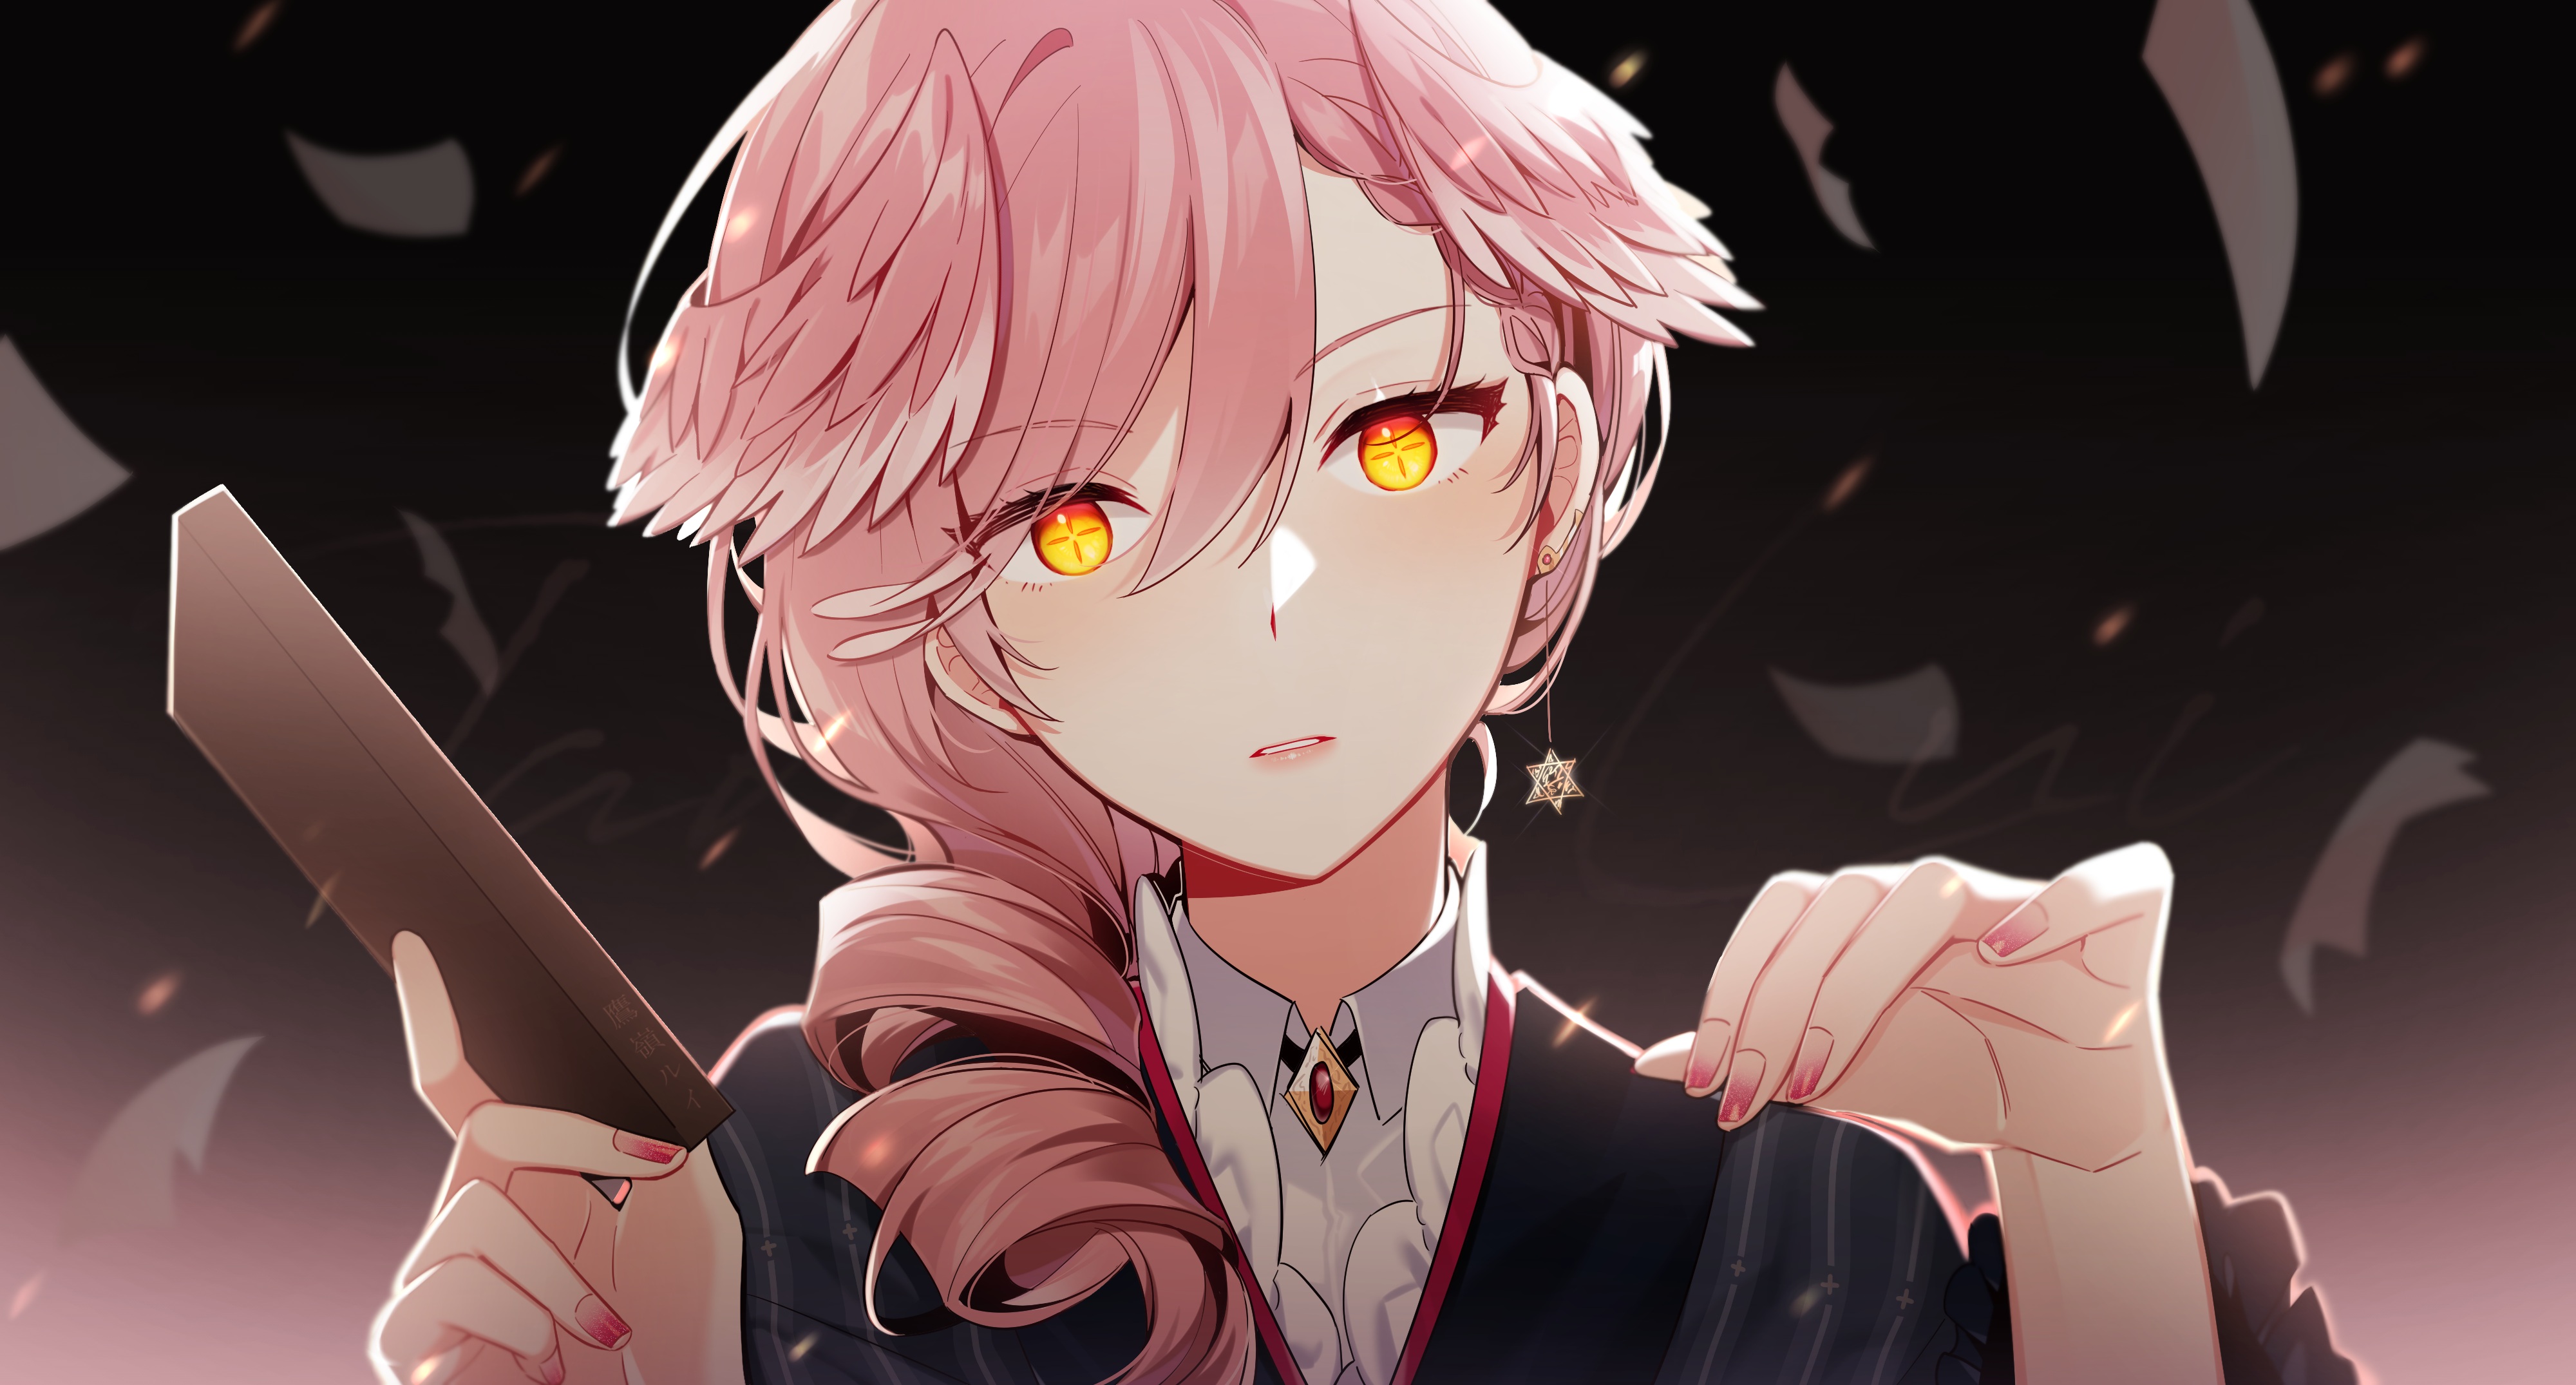 1190762 anime boys glowing eyes anime Solo Leveling manhwa pink eyes   Rare Gallery HD Wallpapers